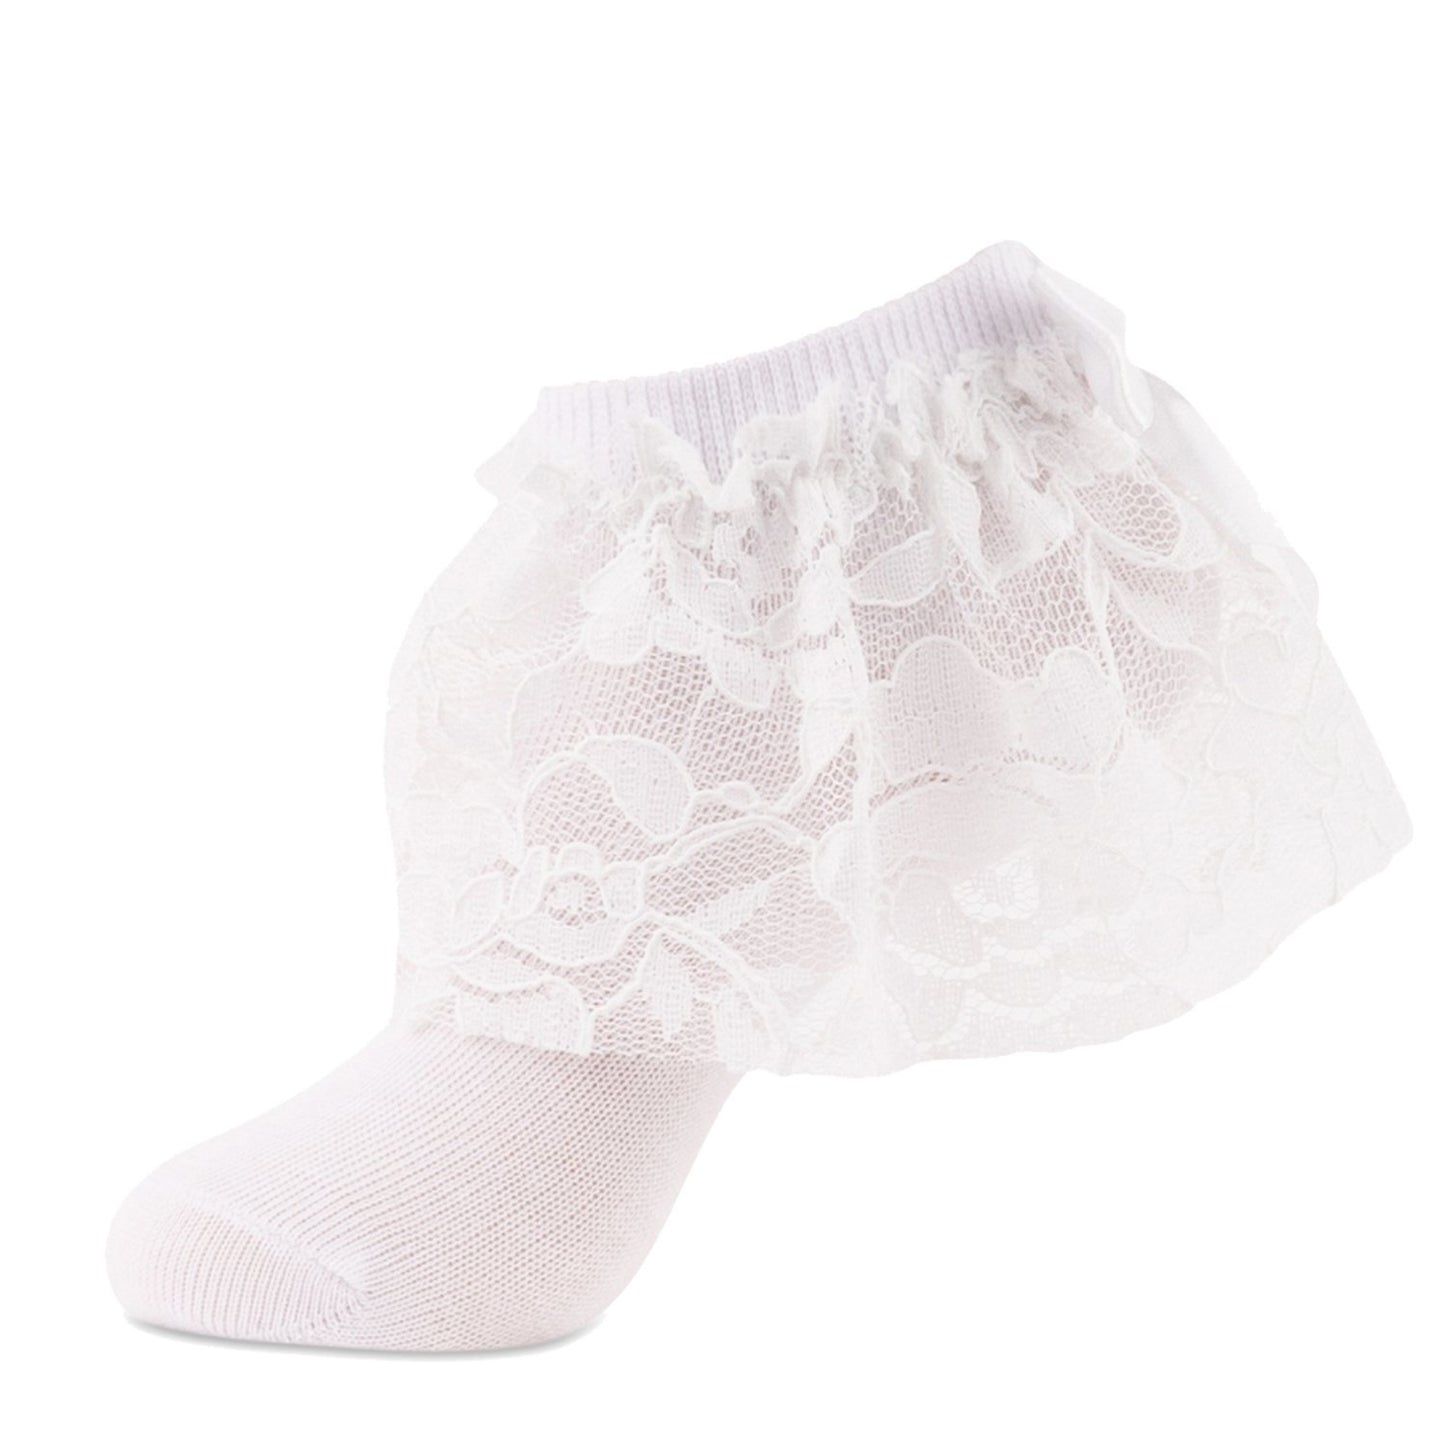 jrp sock girls white floral lace ruffle anklet sock